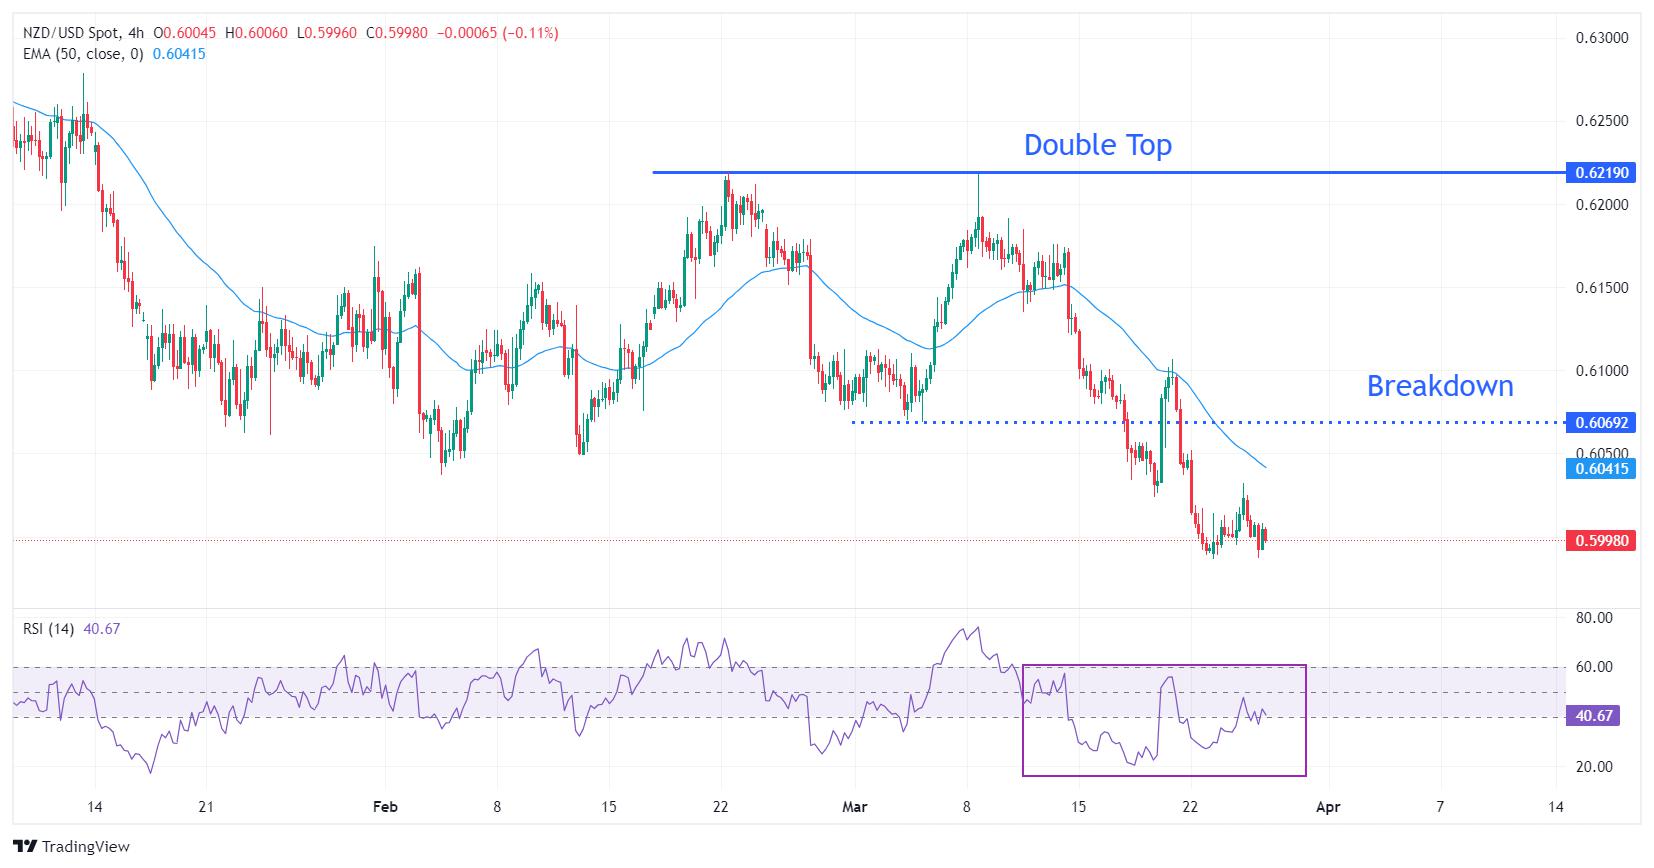 NZD/USD Price Analysis: Finds temporary support slightly below 0.6000, downside remains favored